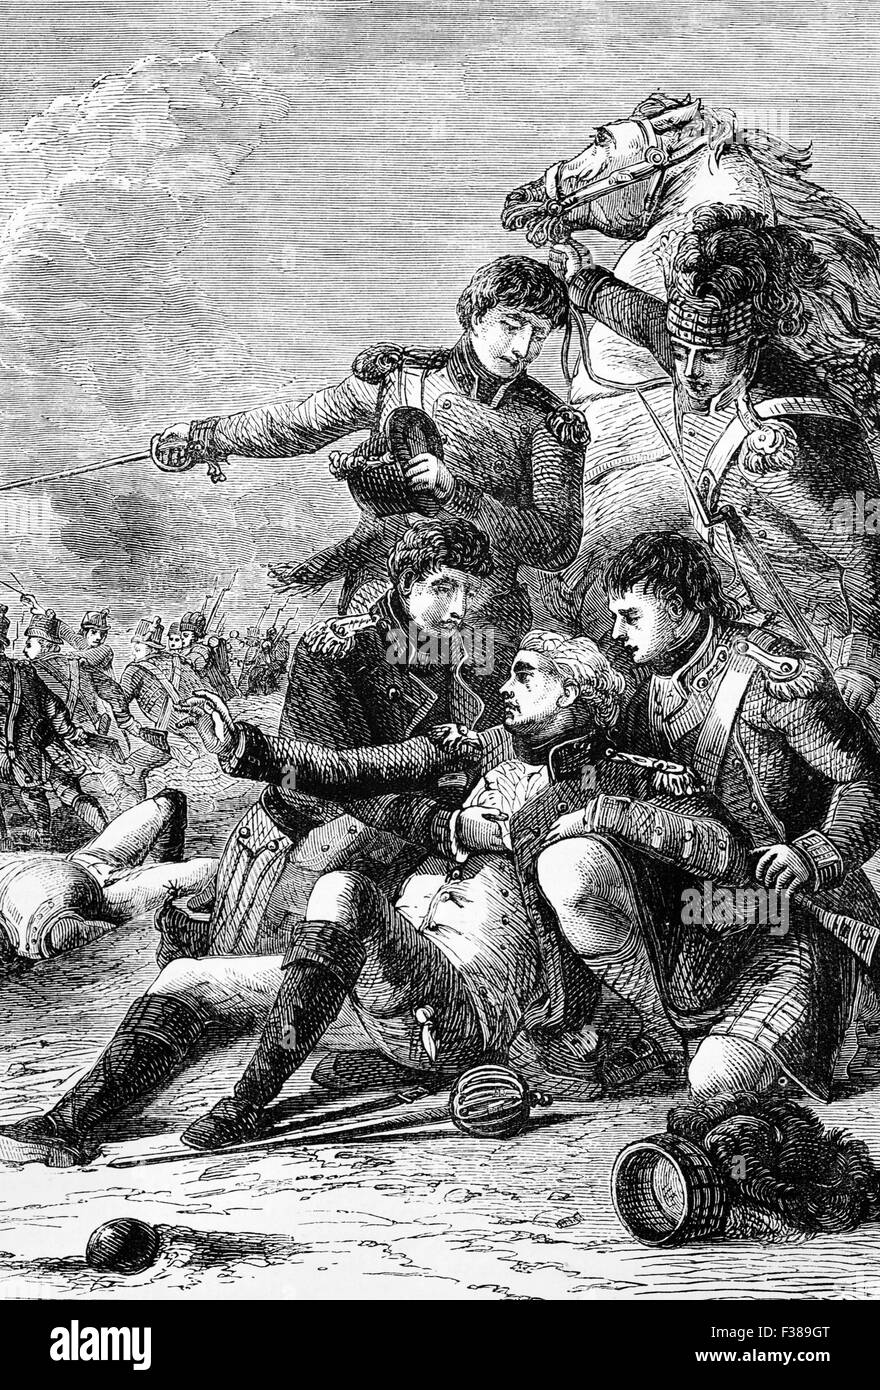 The death of General  Sir Ralph Abercrombie, near the ruins of Nicopolis, during the Battle of Alexandria fought on March 21, 1801 between the French army under General Menou and the British expeditionary corps. Stock Photo